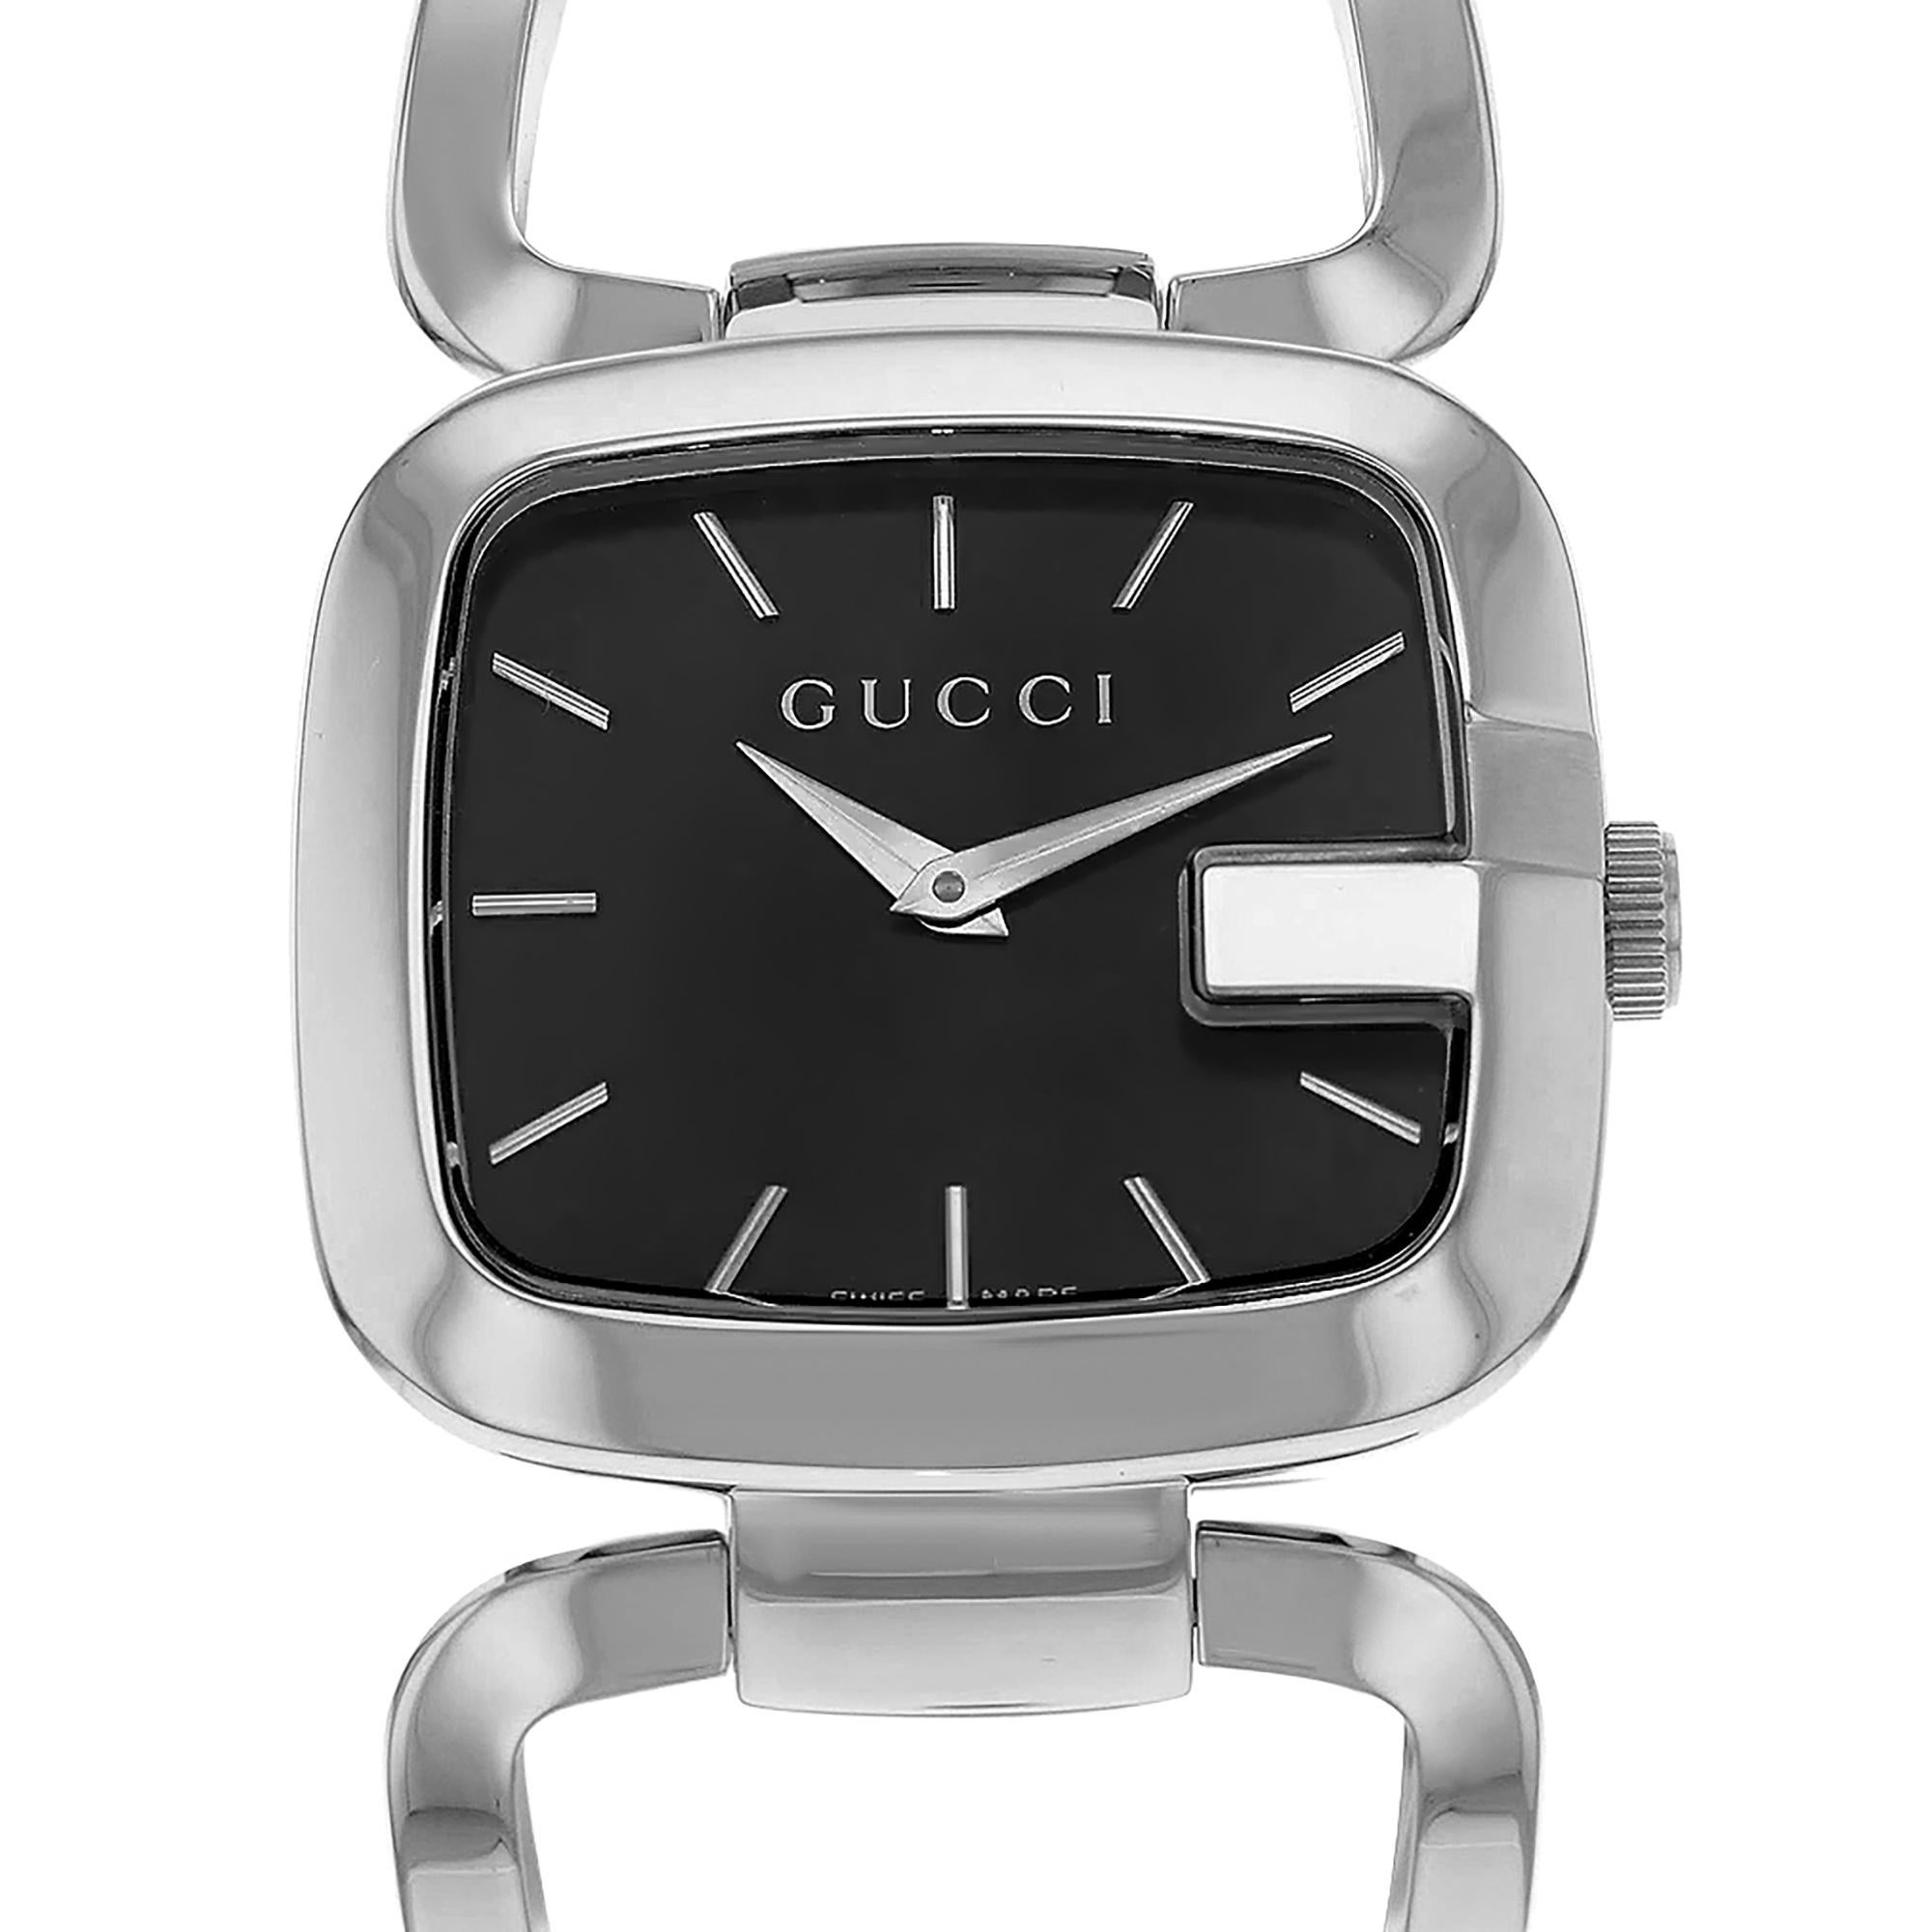 This display model Gucci 125 YA125407  is a beautiful Ladie's timepiece that is powered by quartz (battery) movement which is cased in a stainless steel case. It has a square shape face, no features dial and has hand sticks style markers. It is